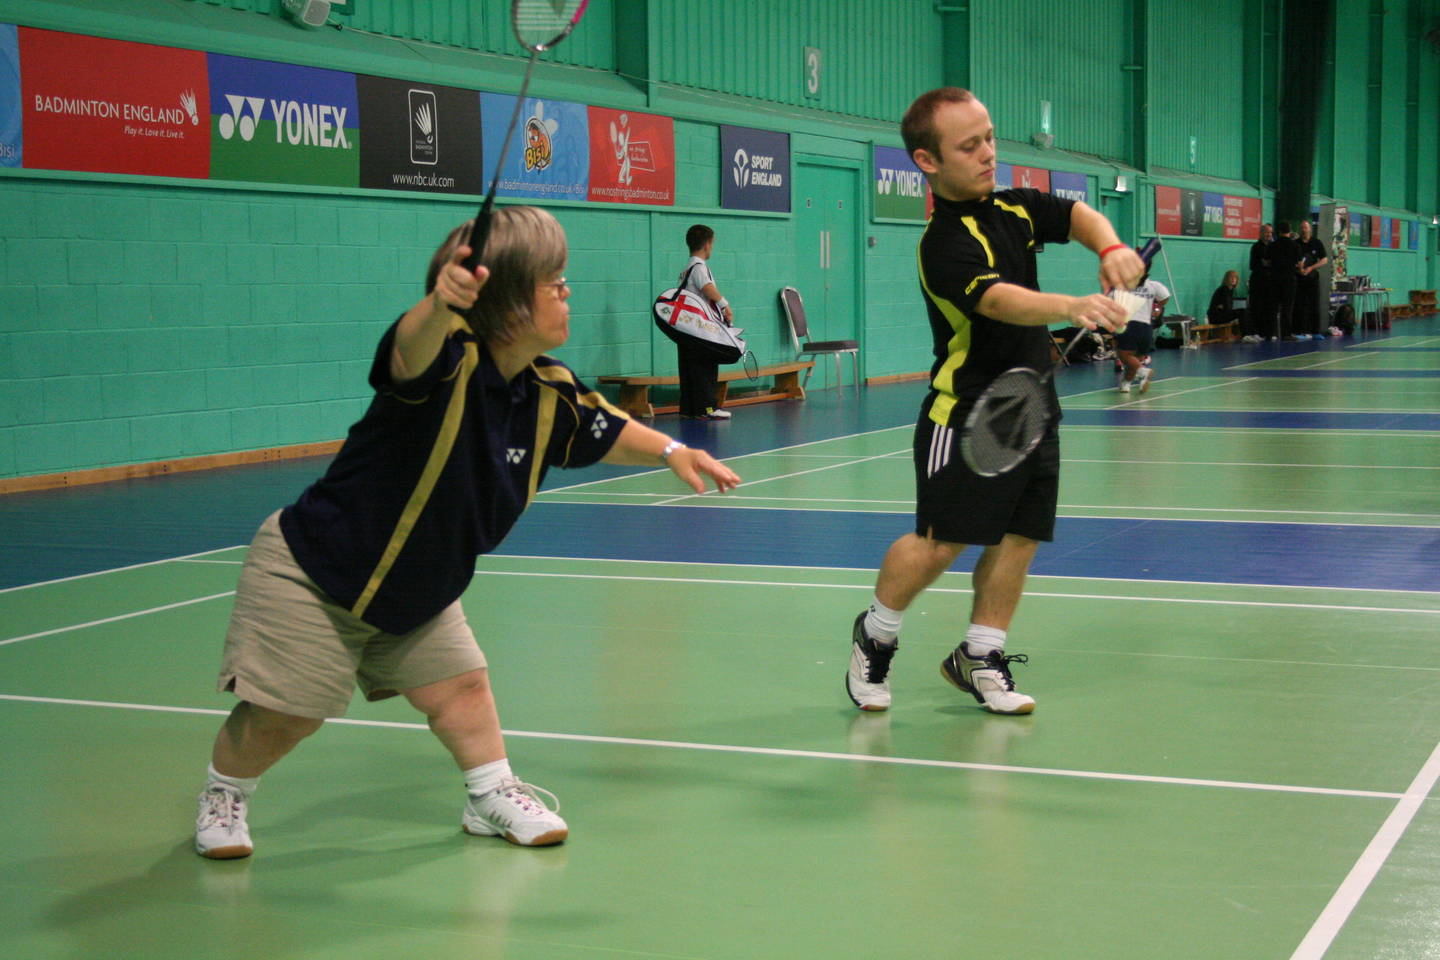 Man and woman with dwarfism playing mixed doubles badminton match